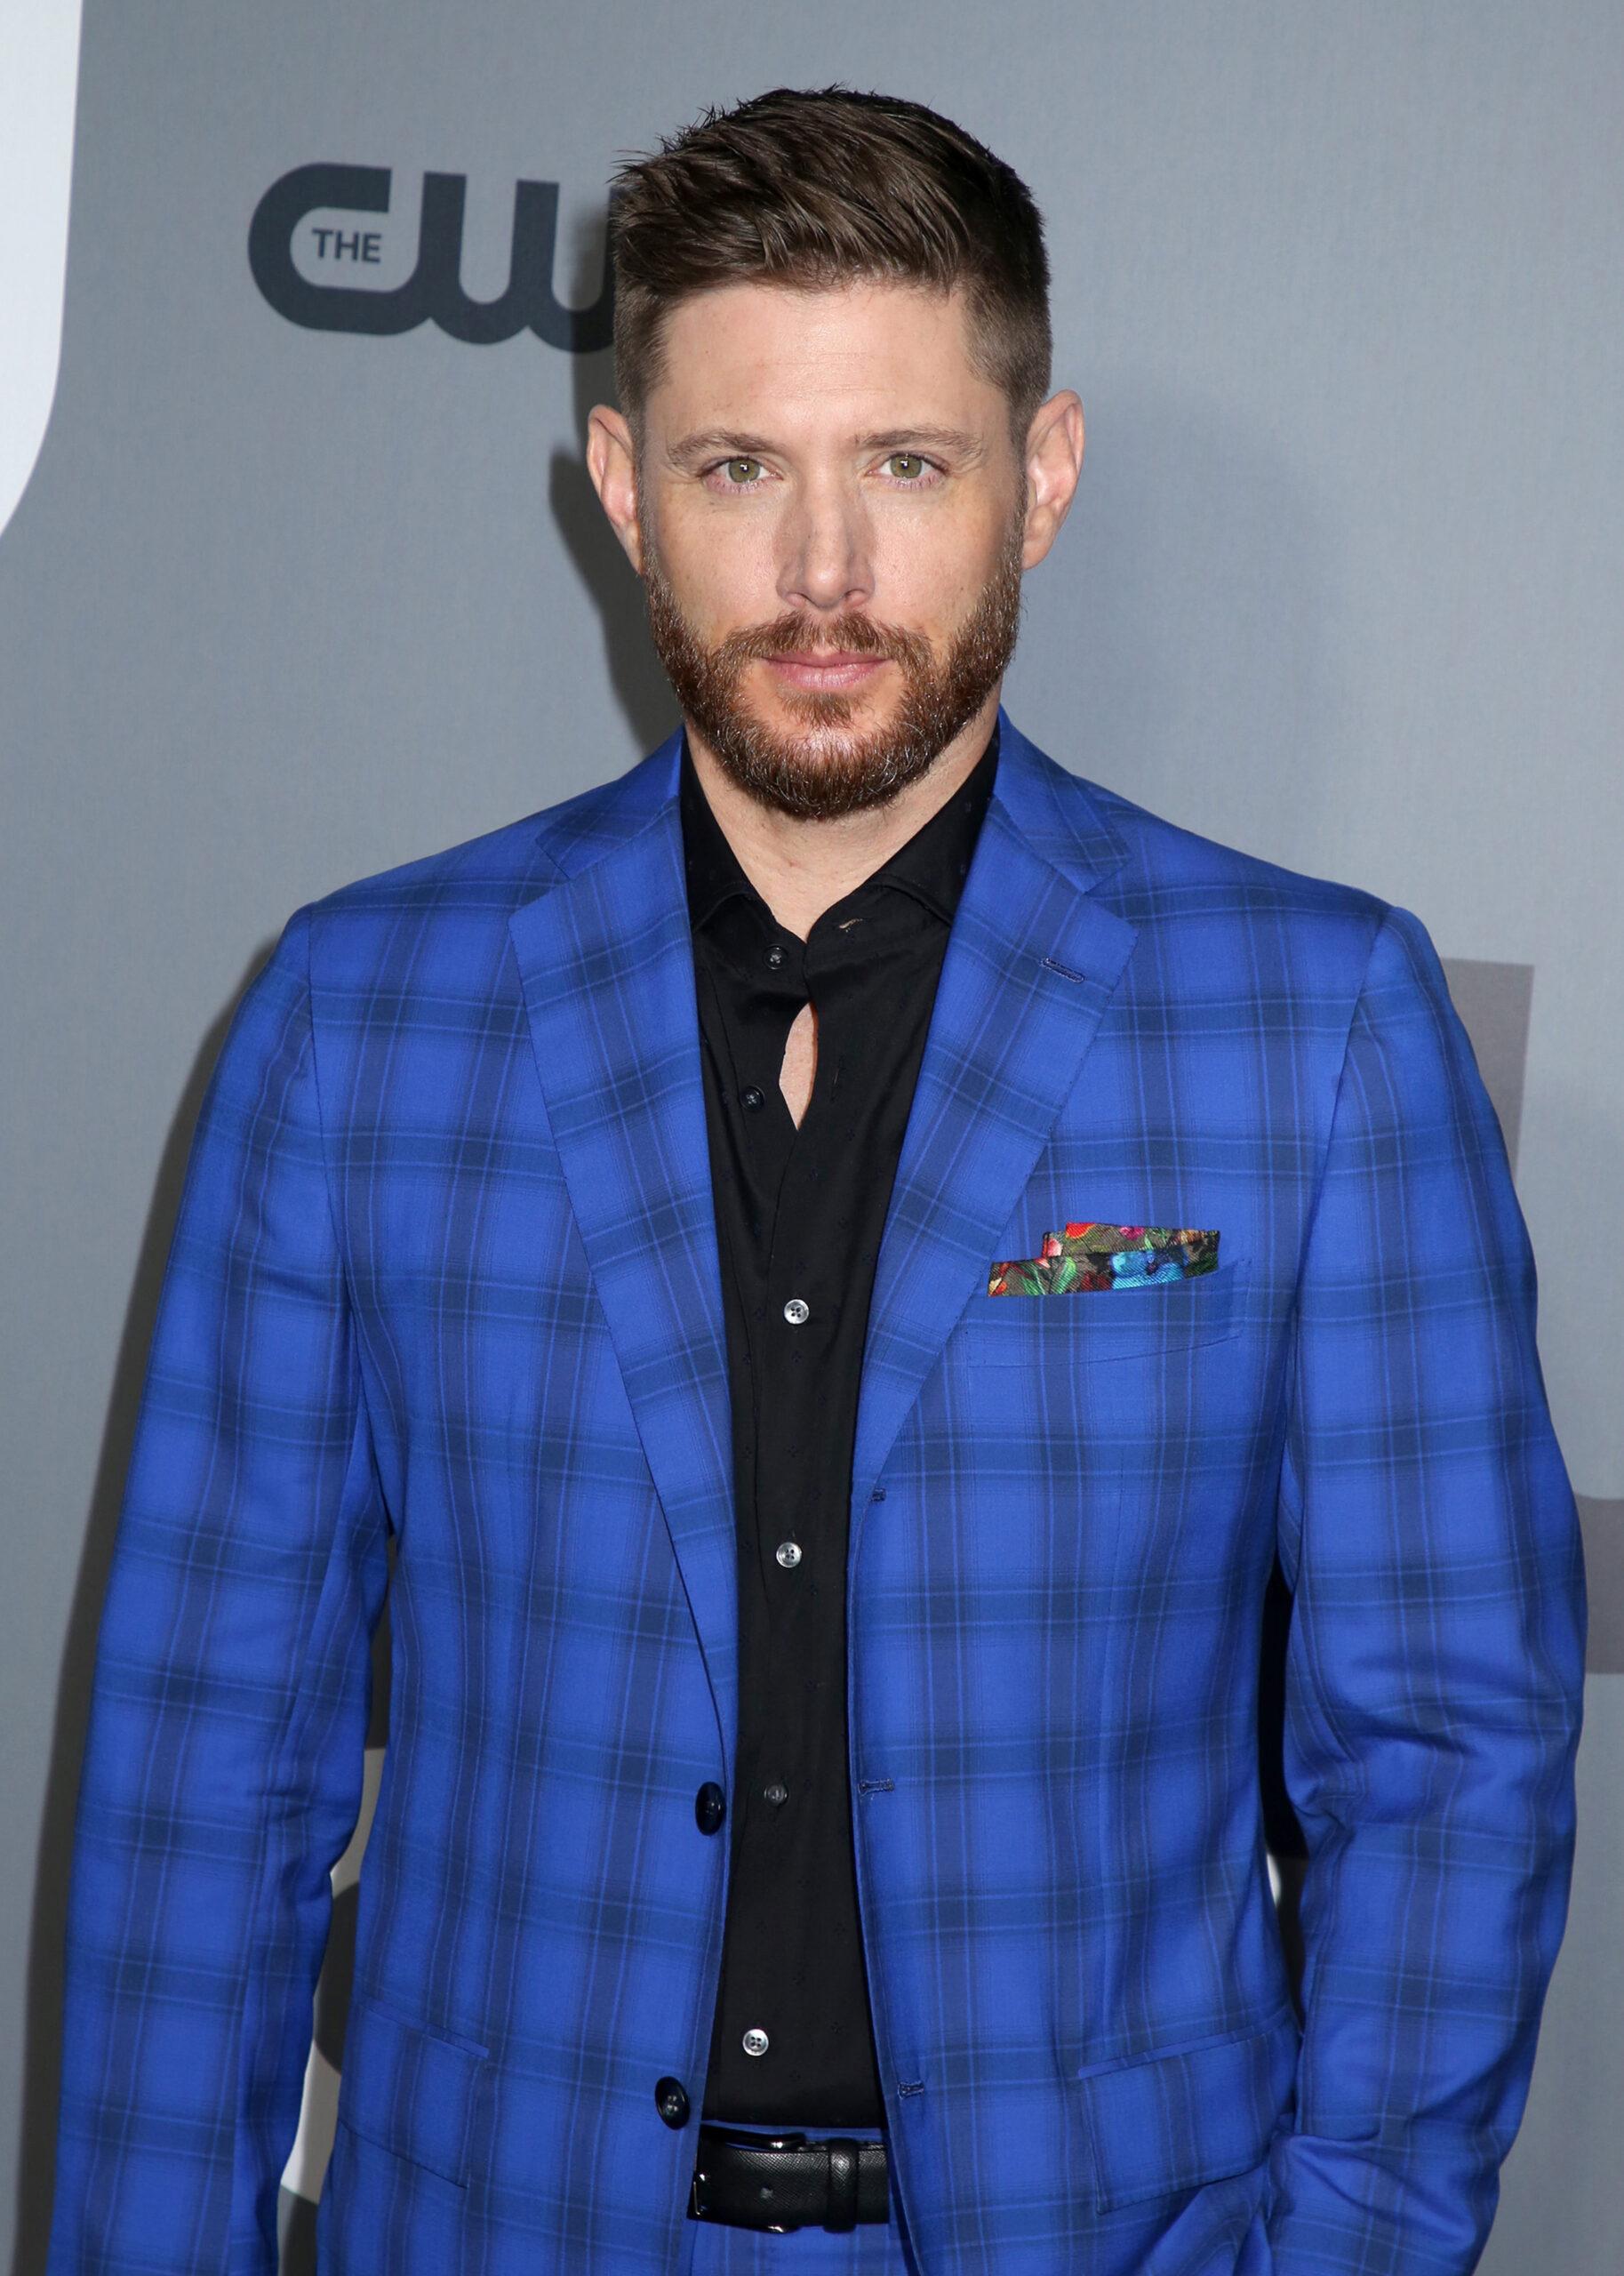 Jensen Ackles at The CW Network 2019 Upfront